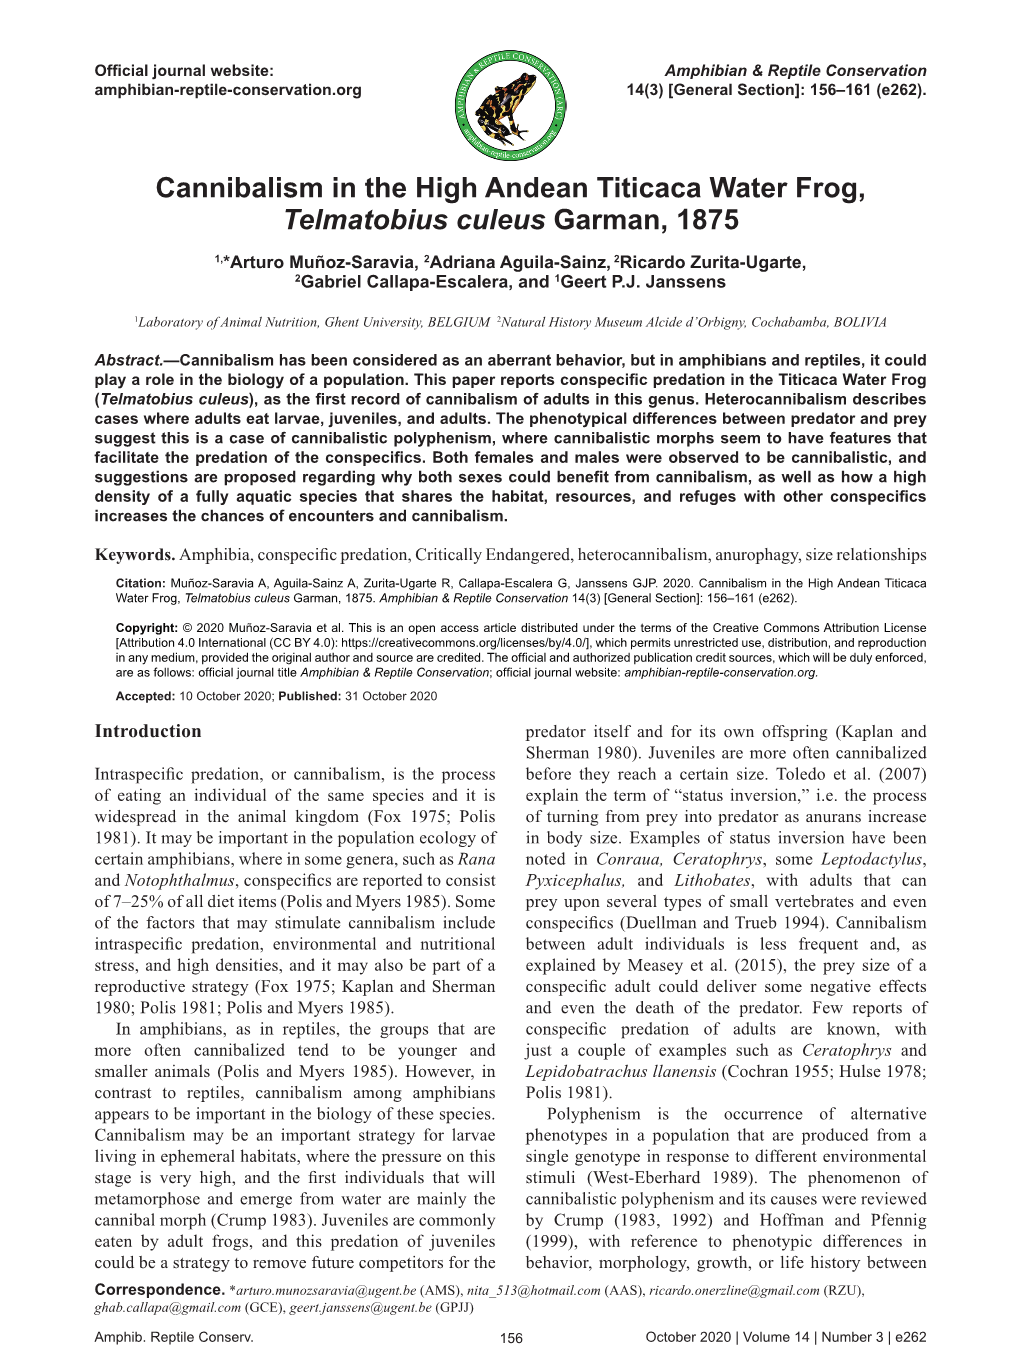 Cannibalism in the High Andean Titicaca Water Frog, Telmatobius